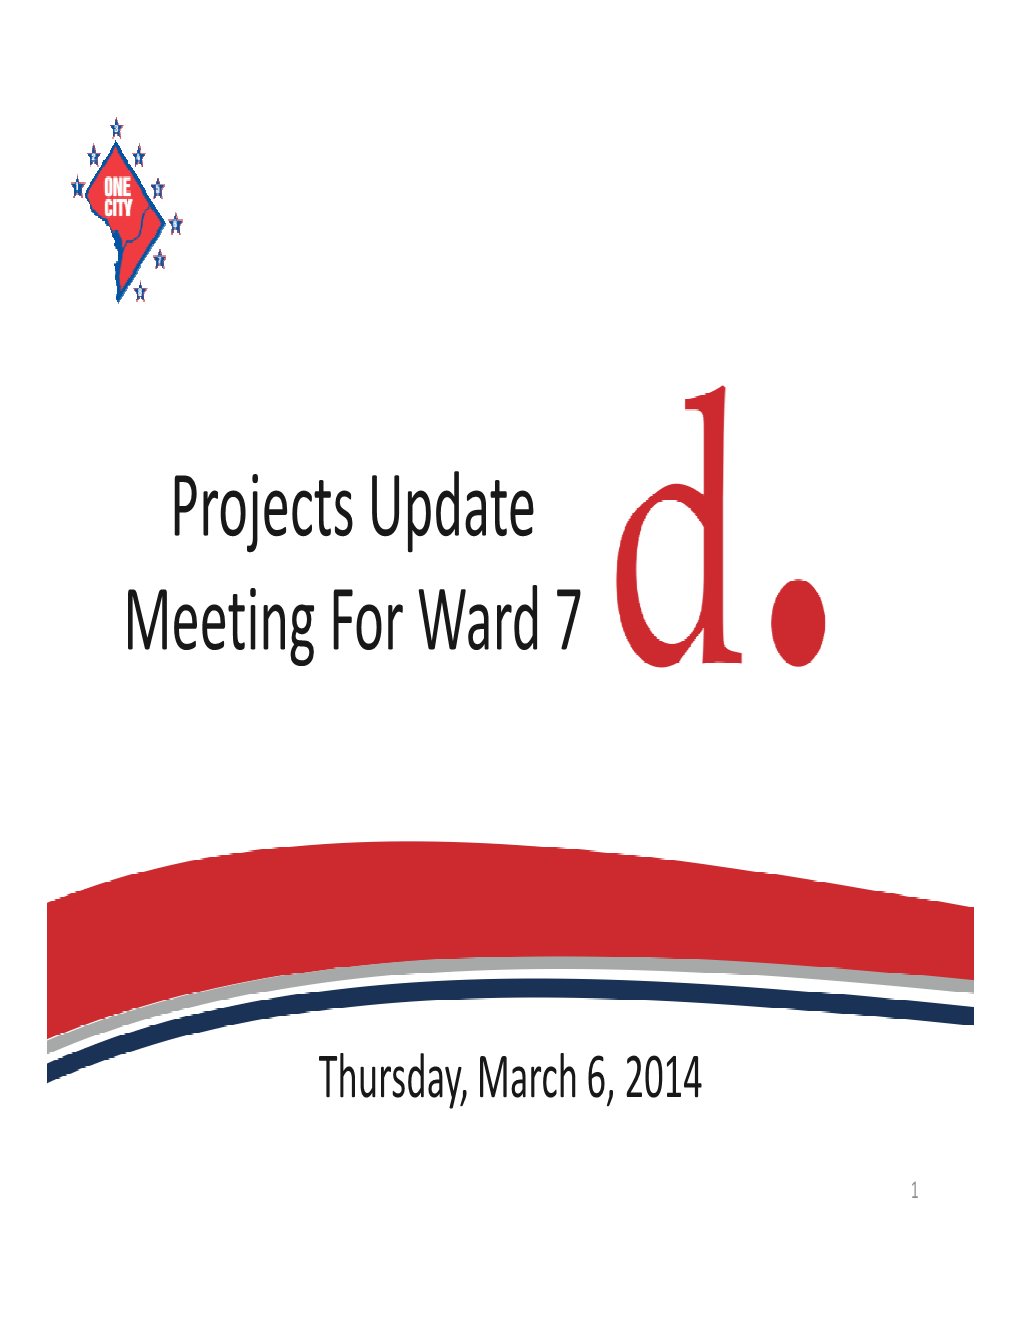 Projects Update Meeting for Ward 7